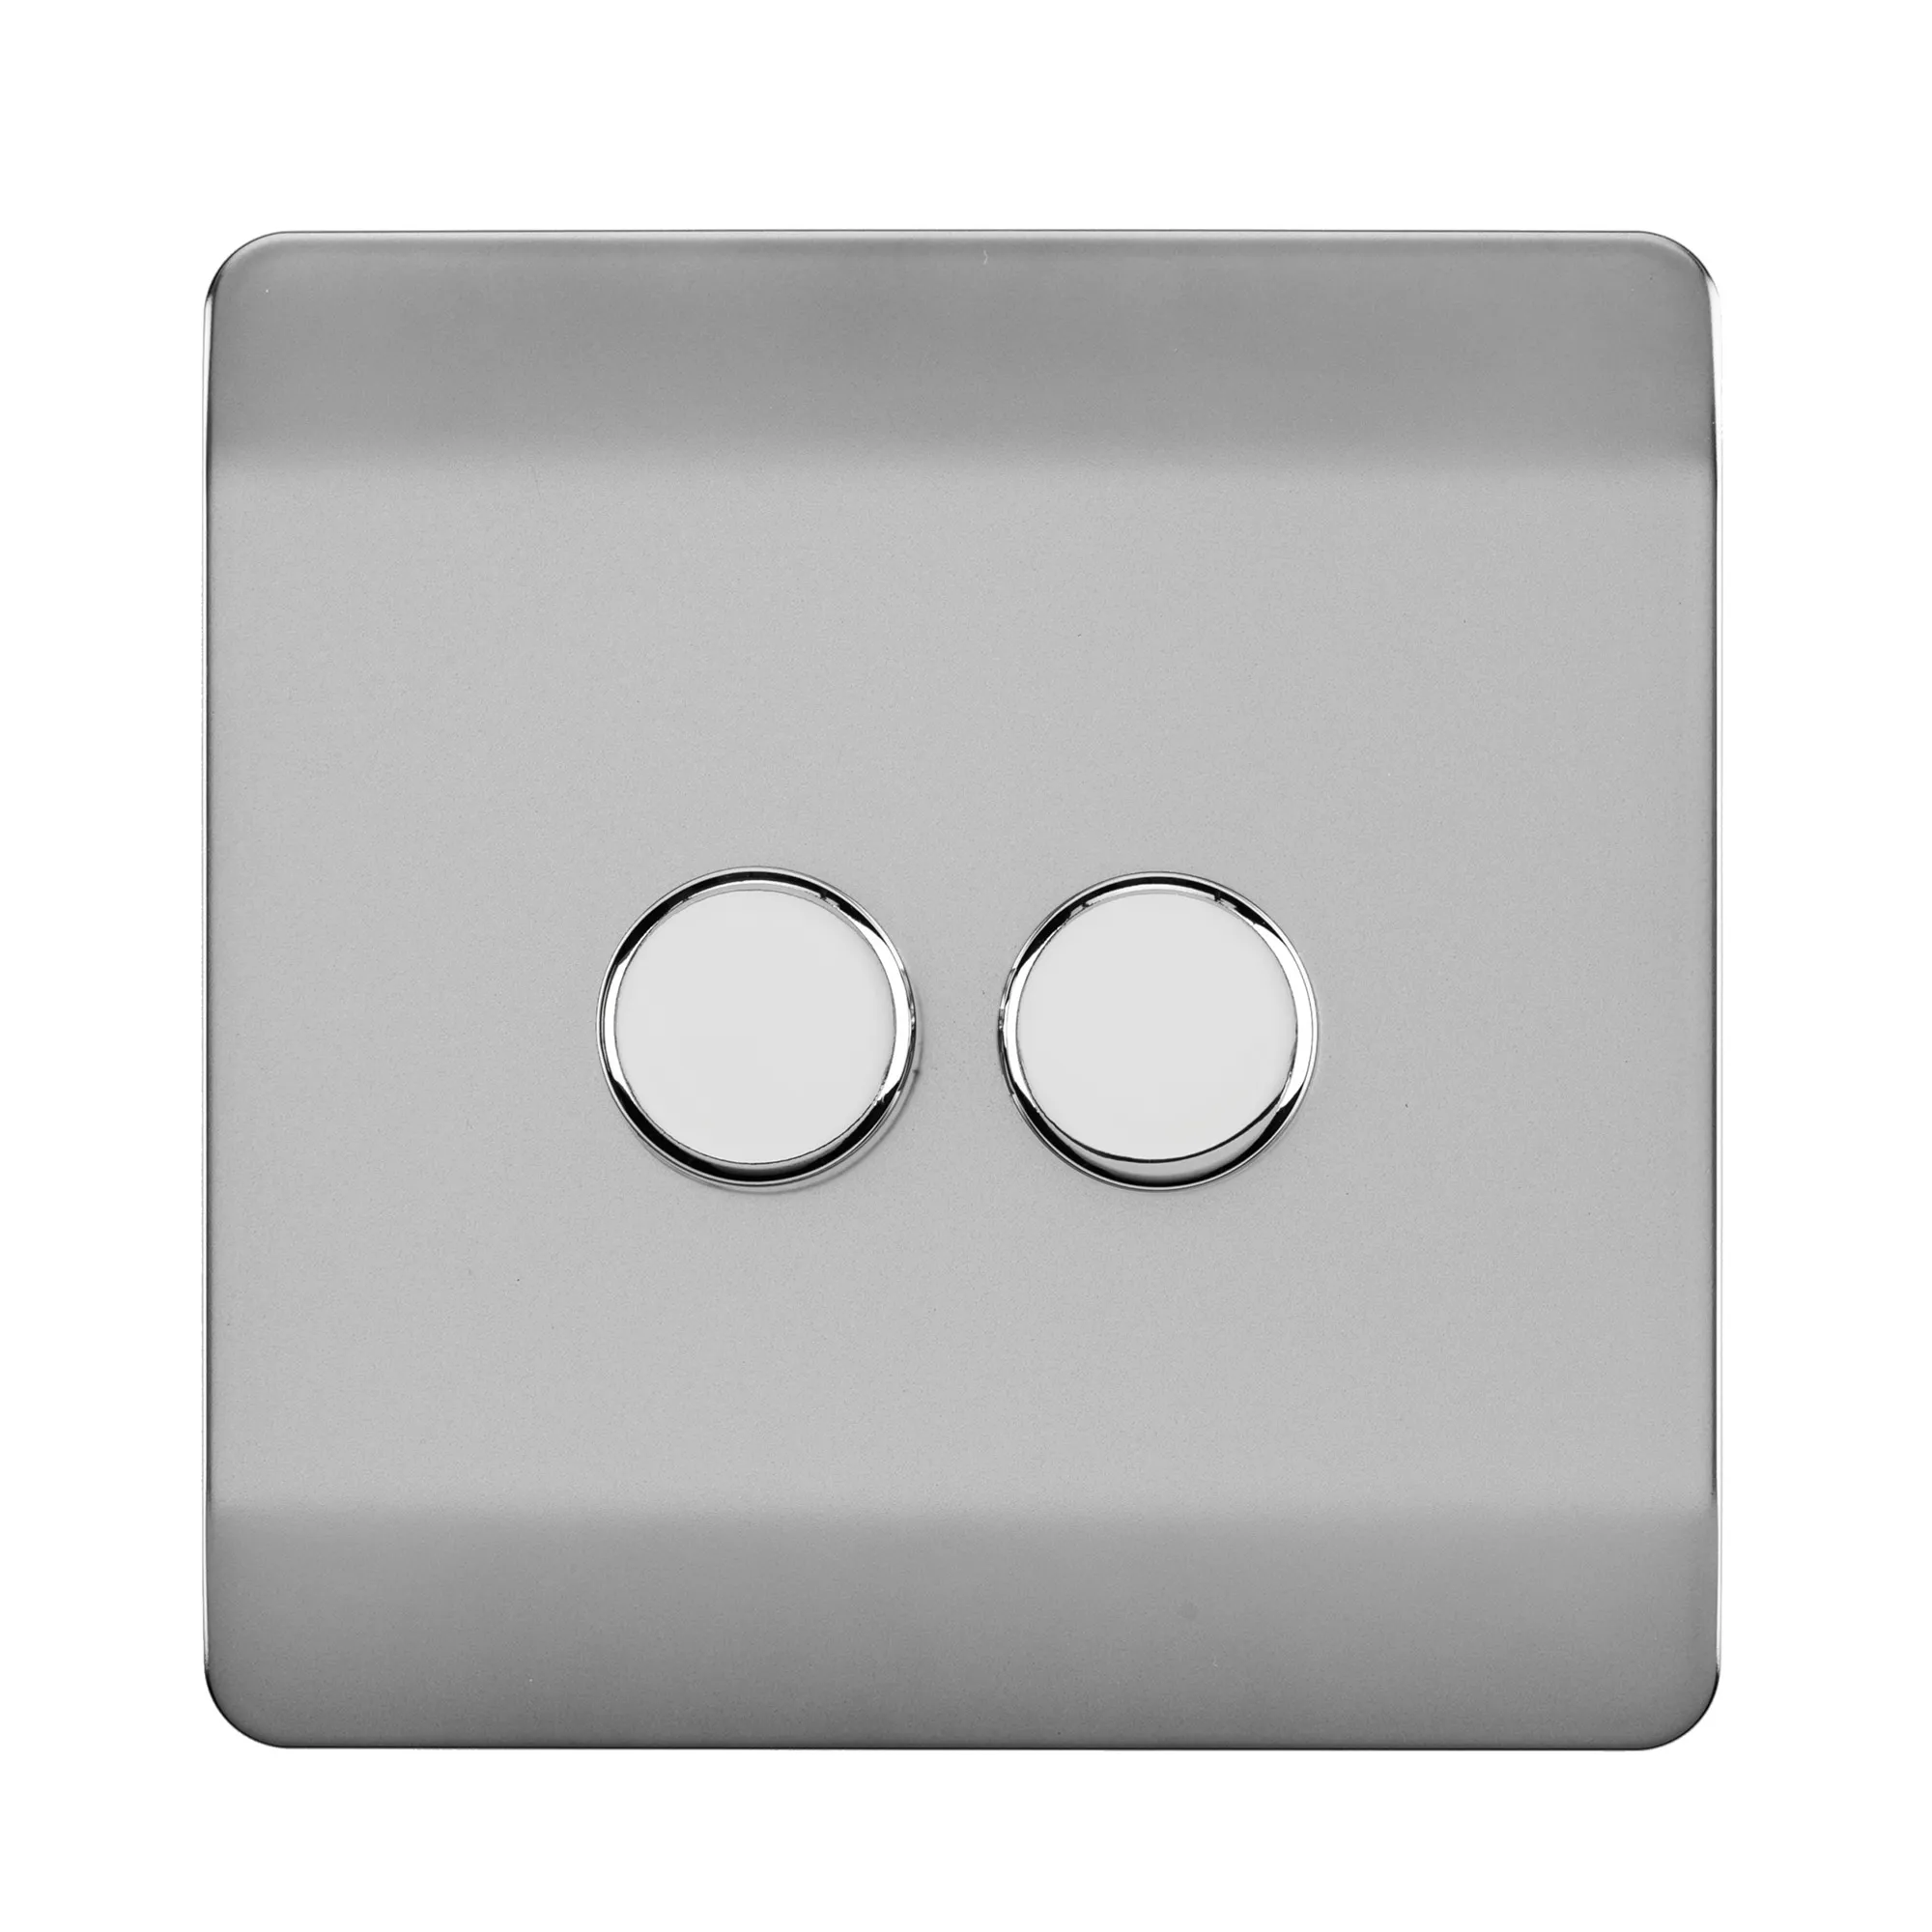 ART-2LDMBS  2 Gang 2 Way LED Dimmer Switch Brushed Steel